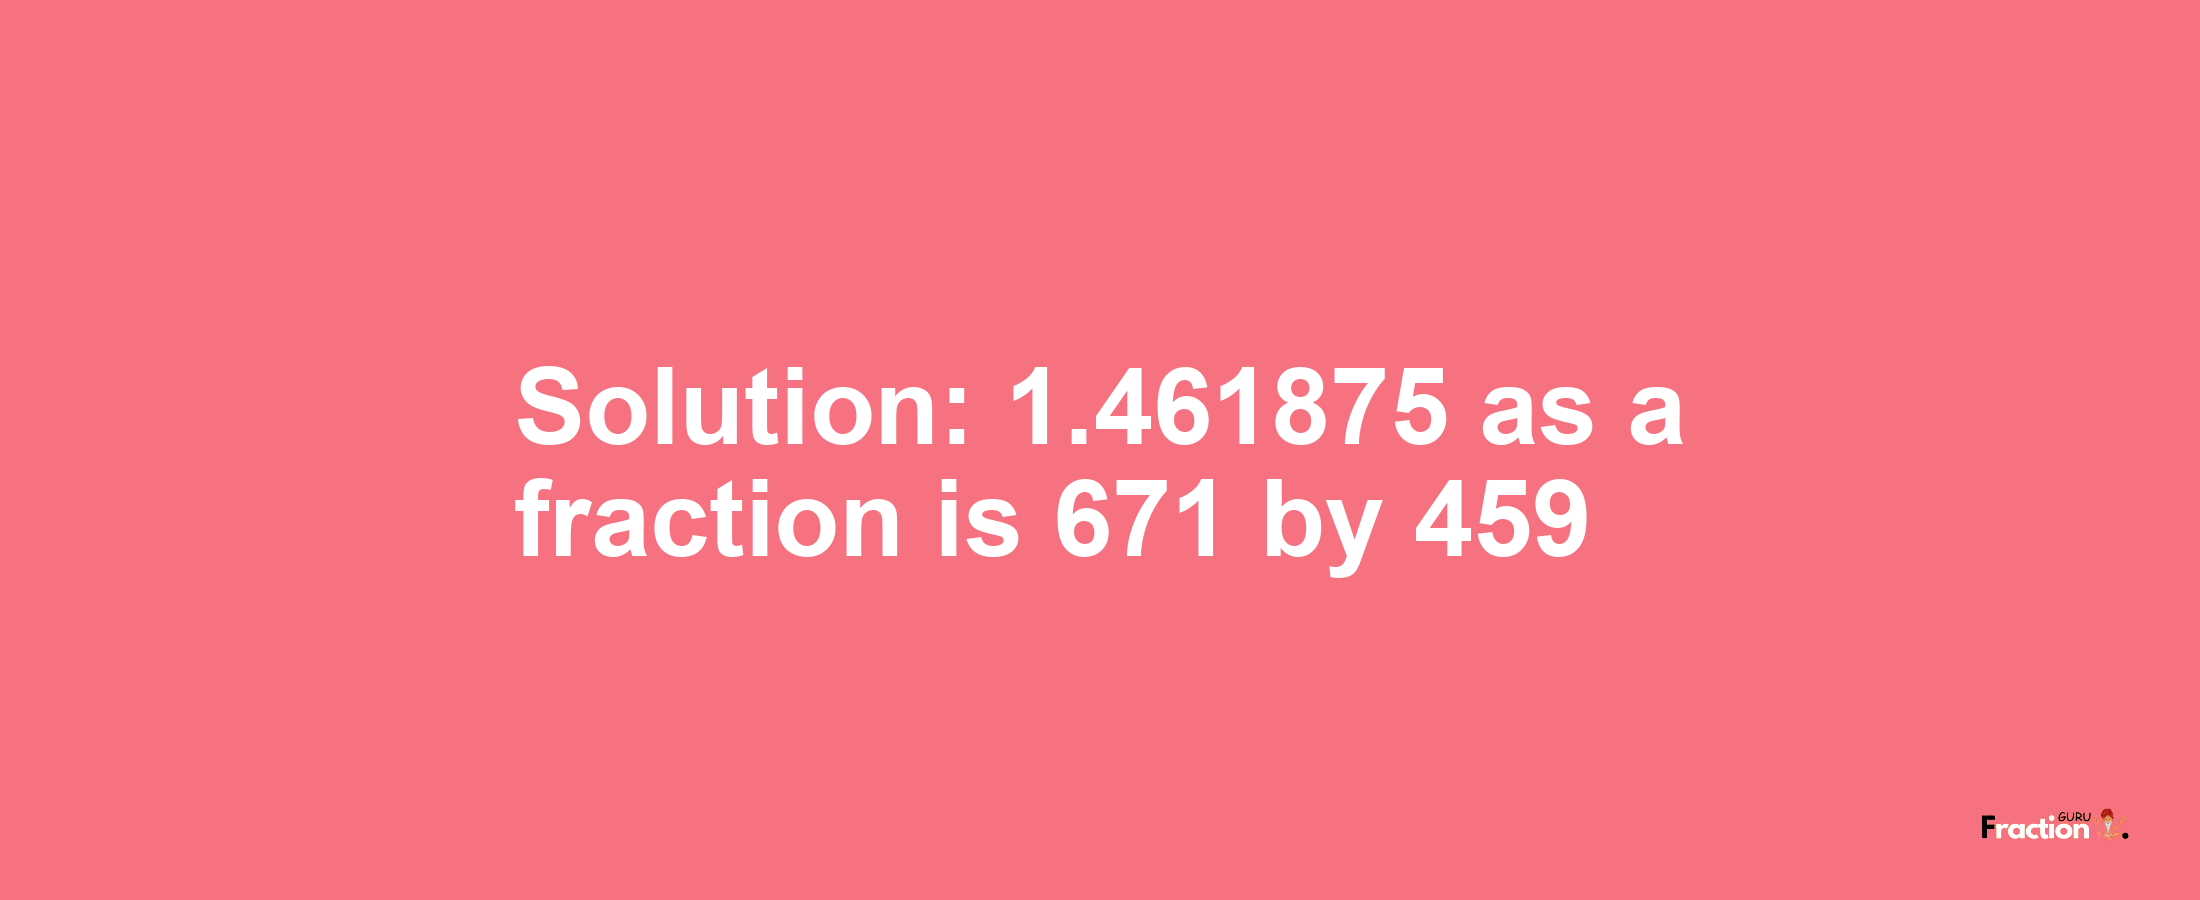 Solution:1.461875 as a fraction is 671/459